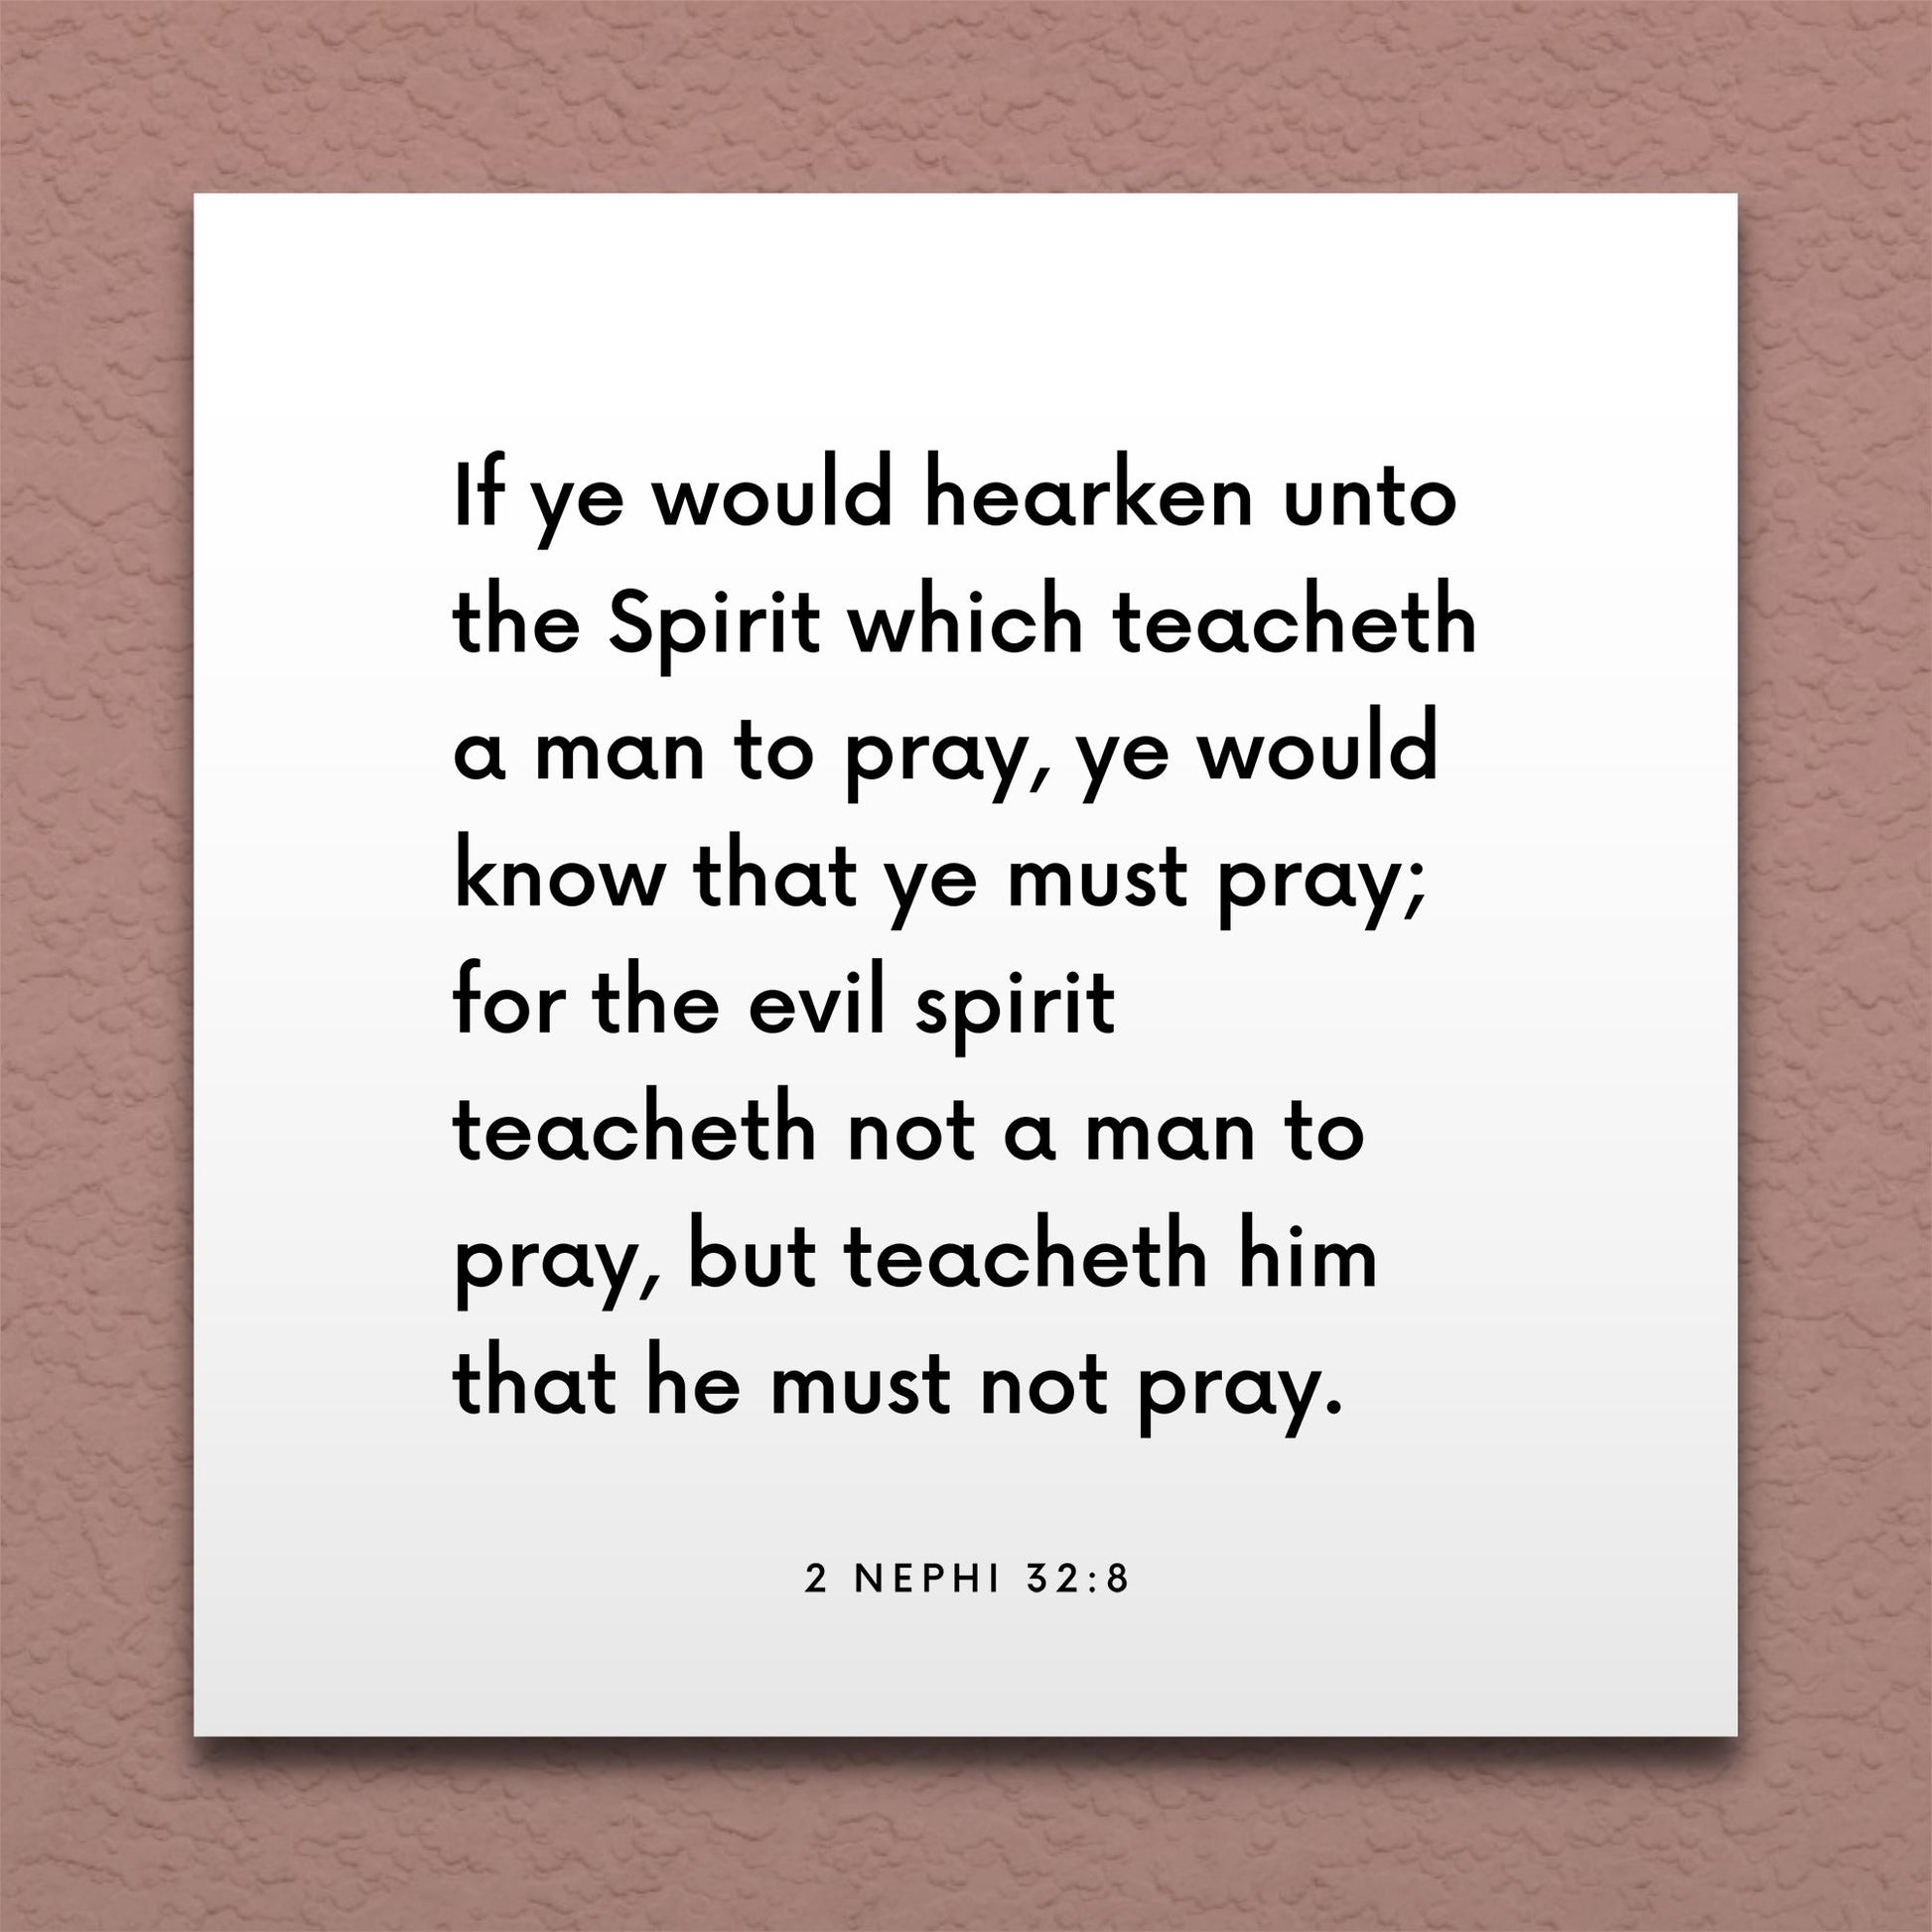 Wall-mounted scripture tile for 2 Nephi 32:8 - "Hearken unto the Spirit which teacheth a man to pray"